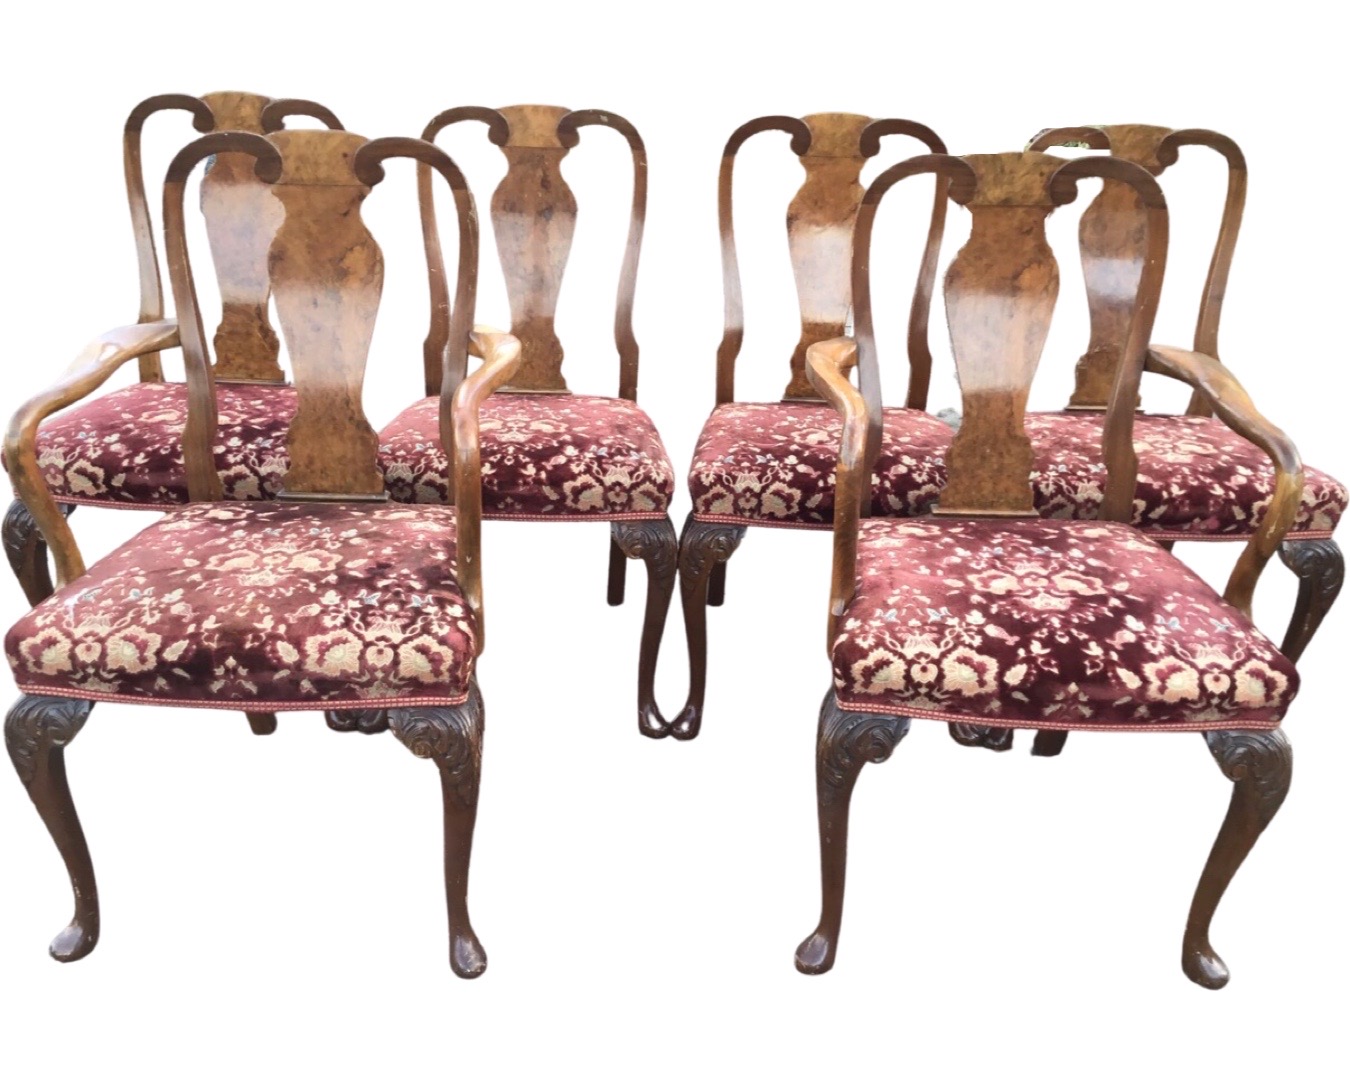 A set of six Queen Anne style walnut dining chairs with vase shaped splats above brocade upholstered